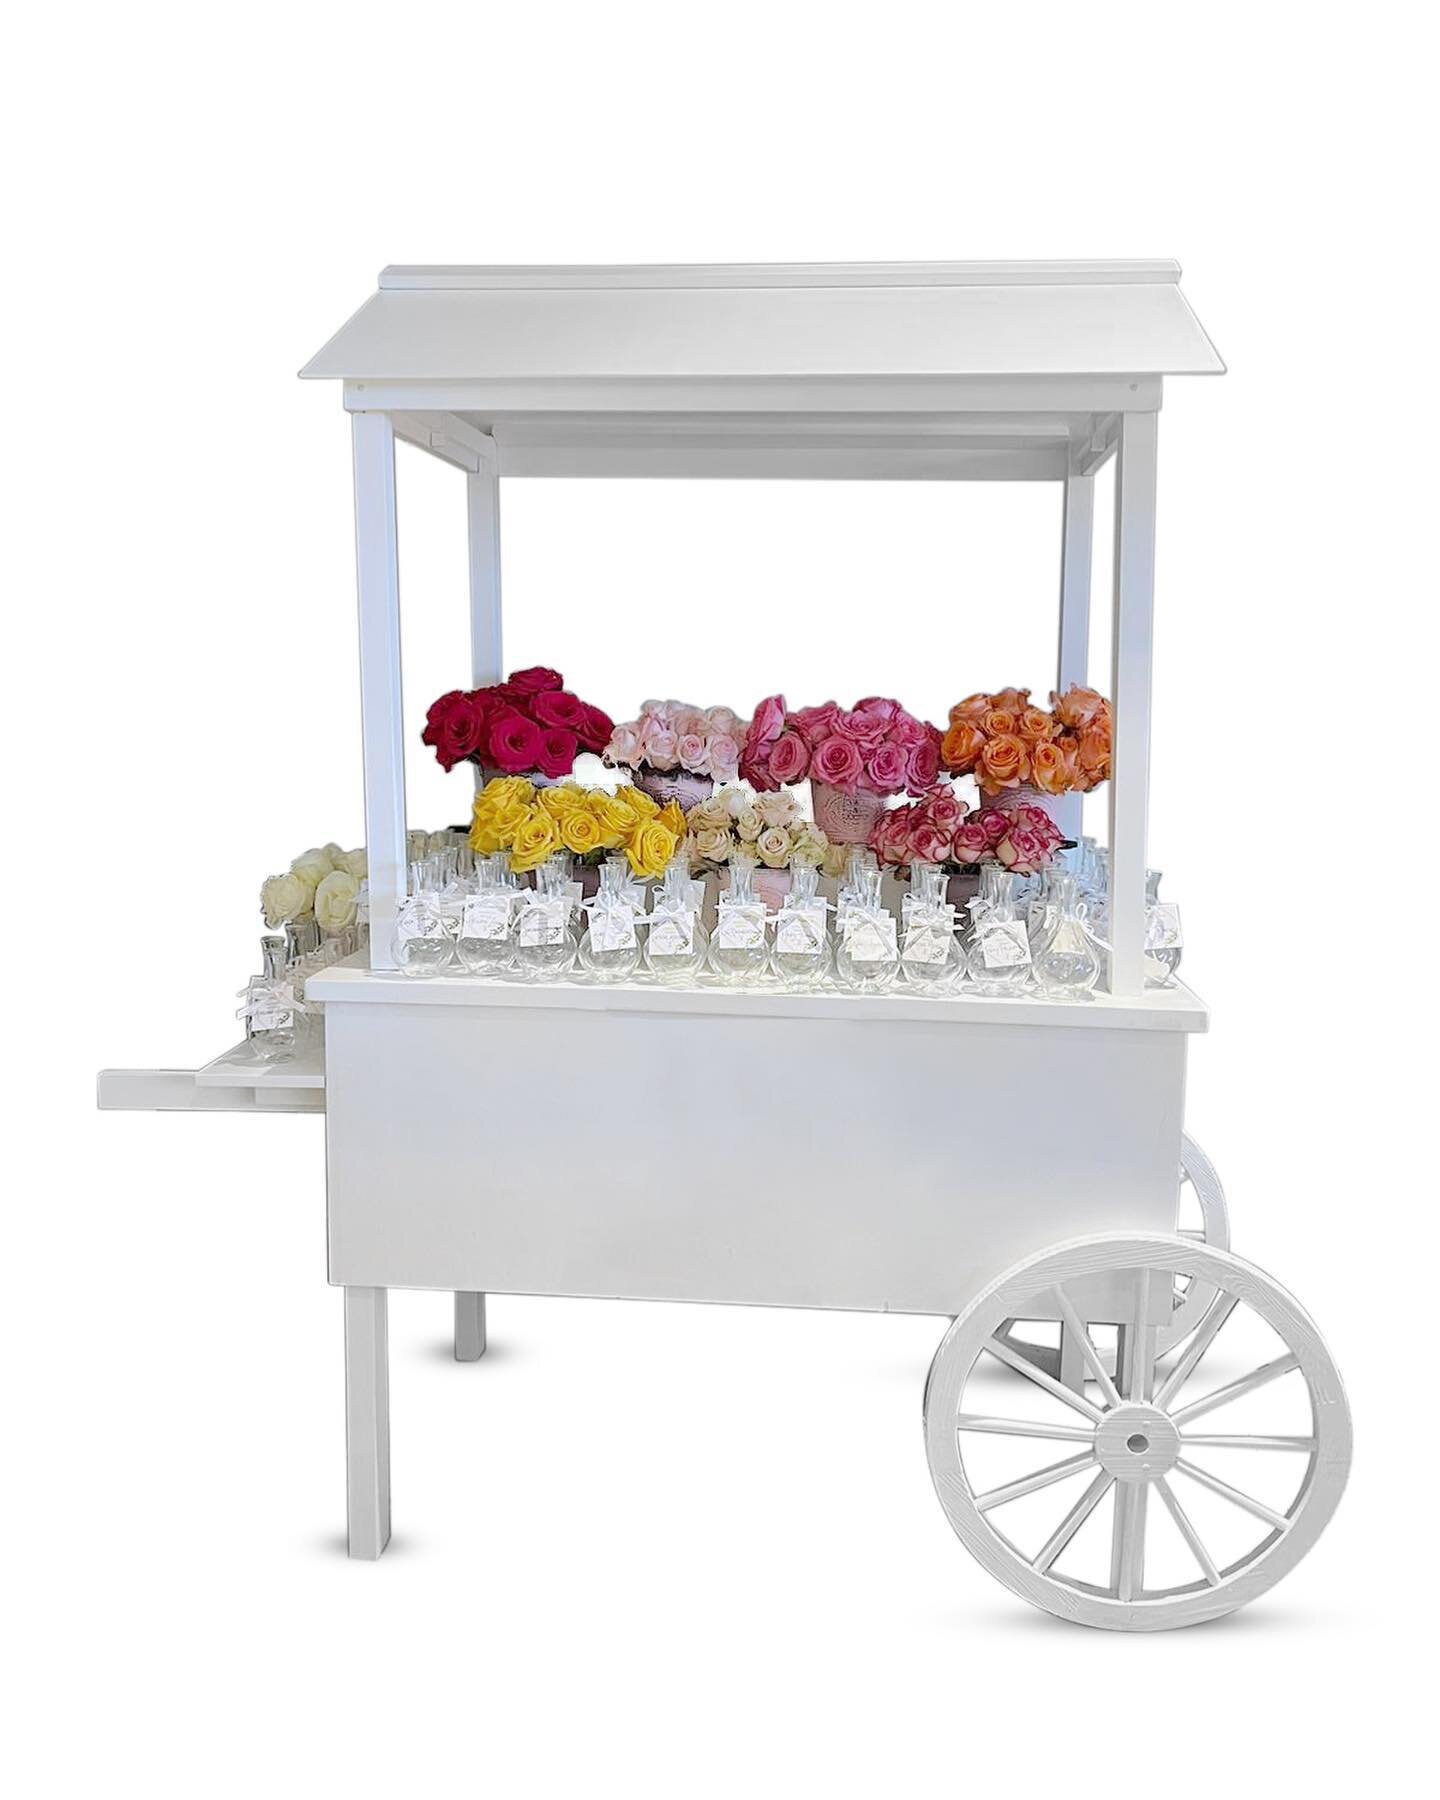 We&rsquo;re beyond excited about the newest addition to our rental inventory!!!

The Adriana Cart can be used for sweets, candy, florals, champagne, favours, and so much more!! 

#eventrentals #candycart #floralcart #sweetcart #candycartrental #vaugh